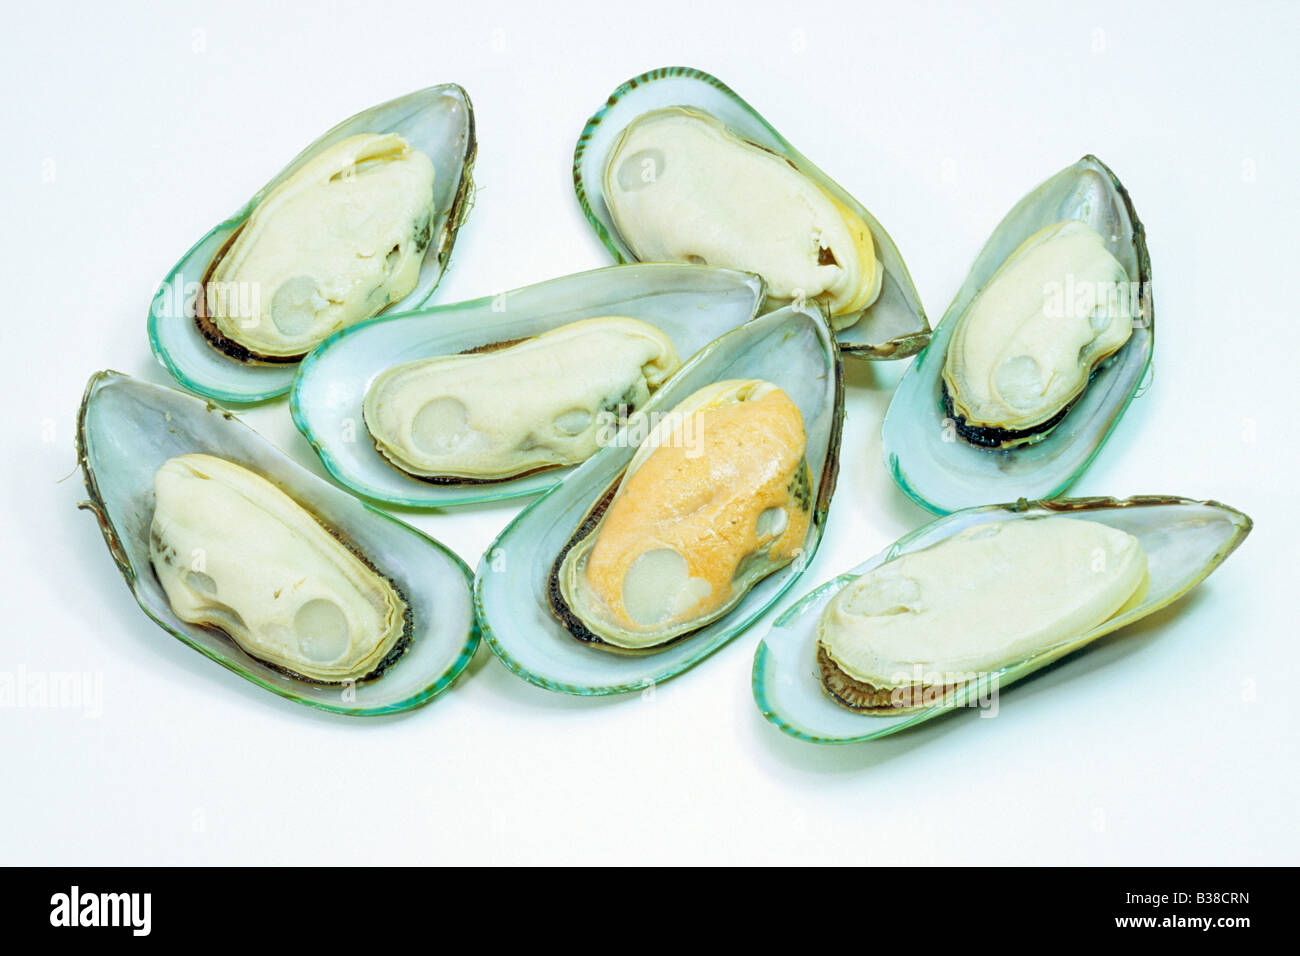 Greenshell Mussel, New Zealand Mussel, Channel Mussel (Perna canaliculus), opened, studio picture Stock Photo